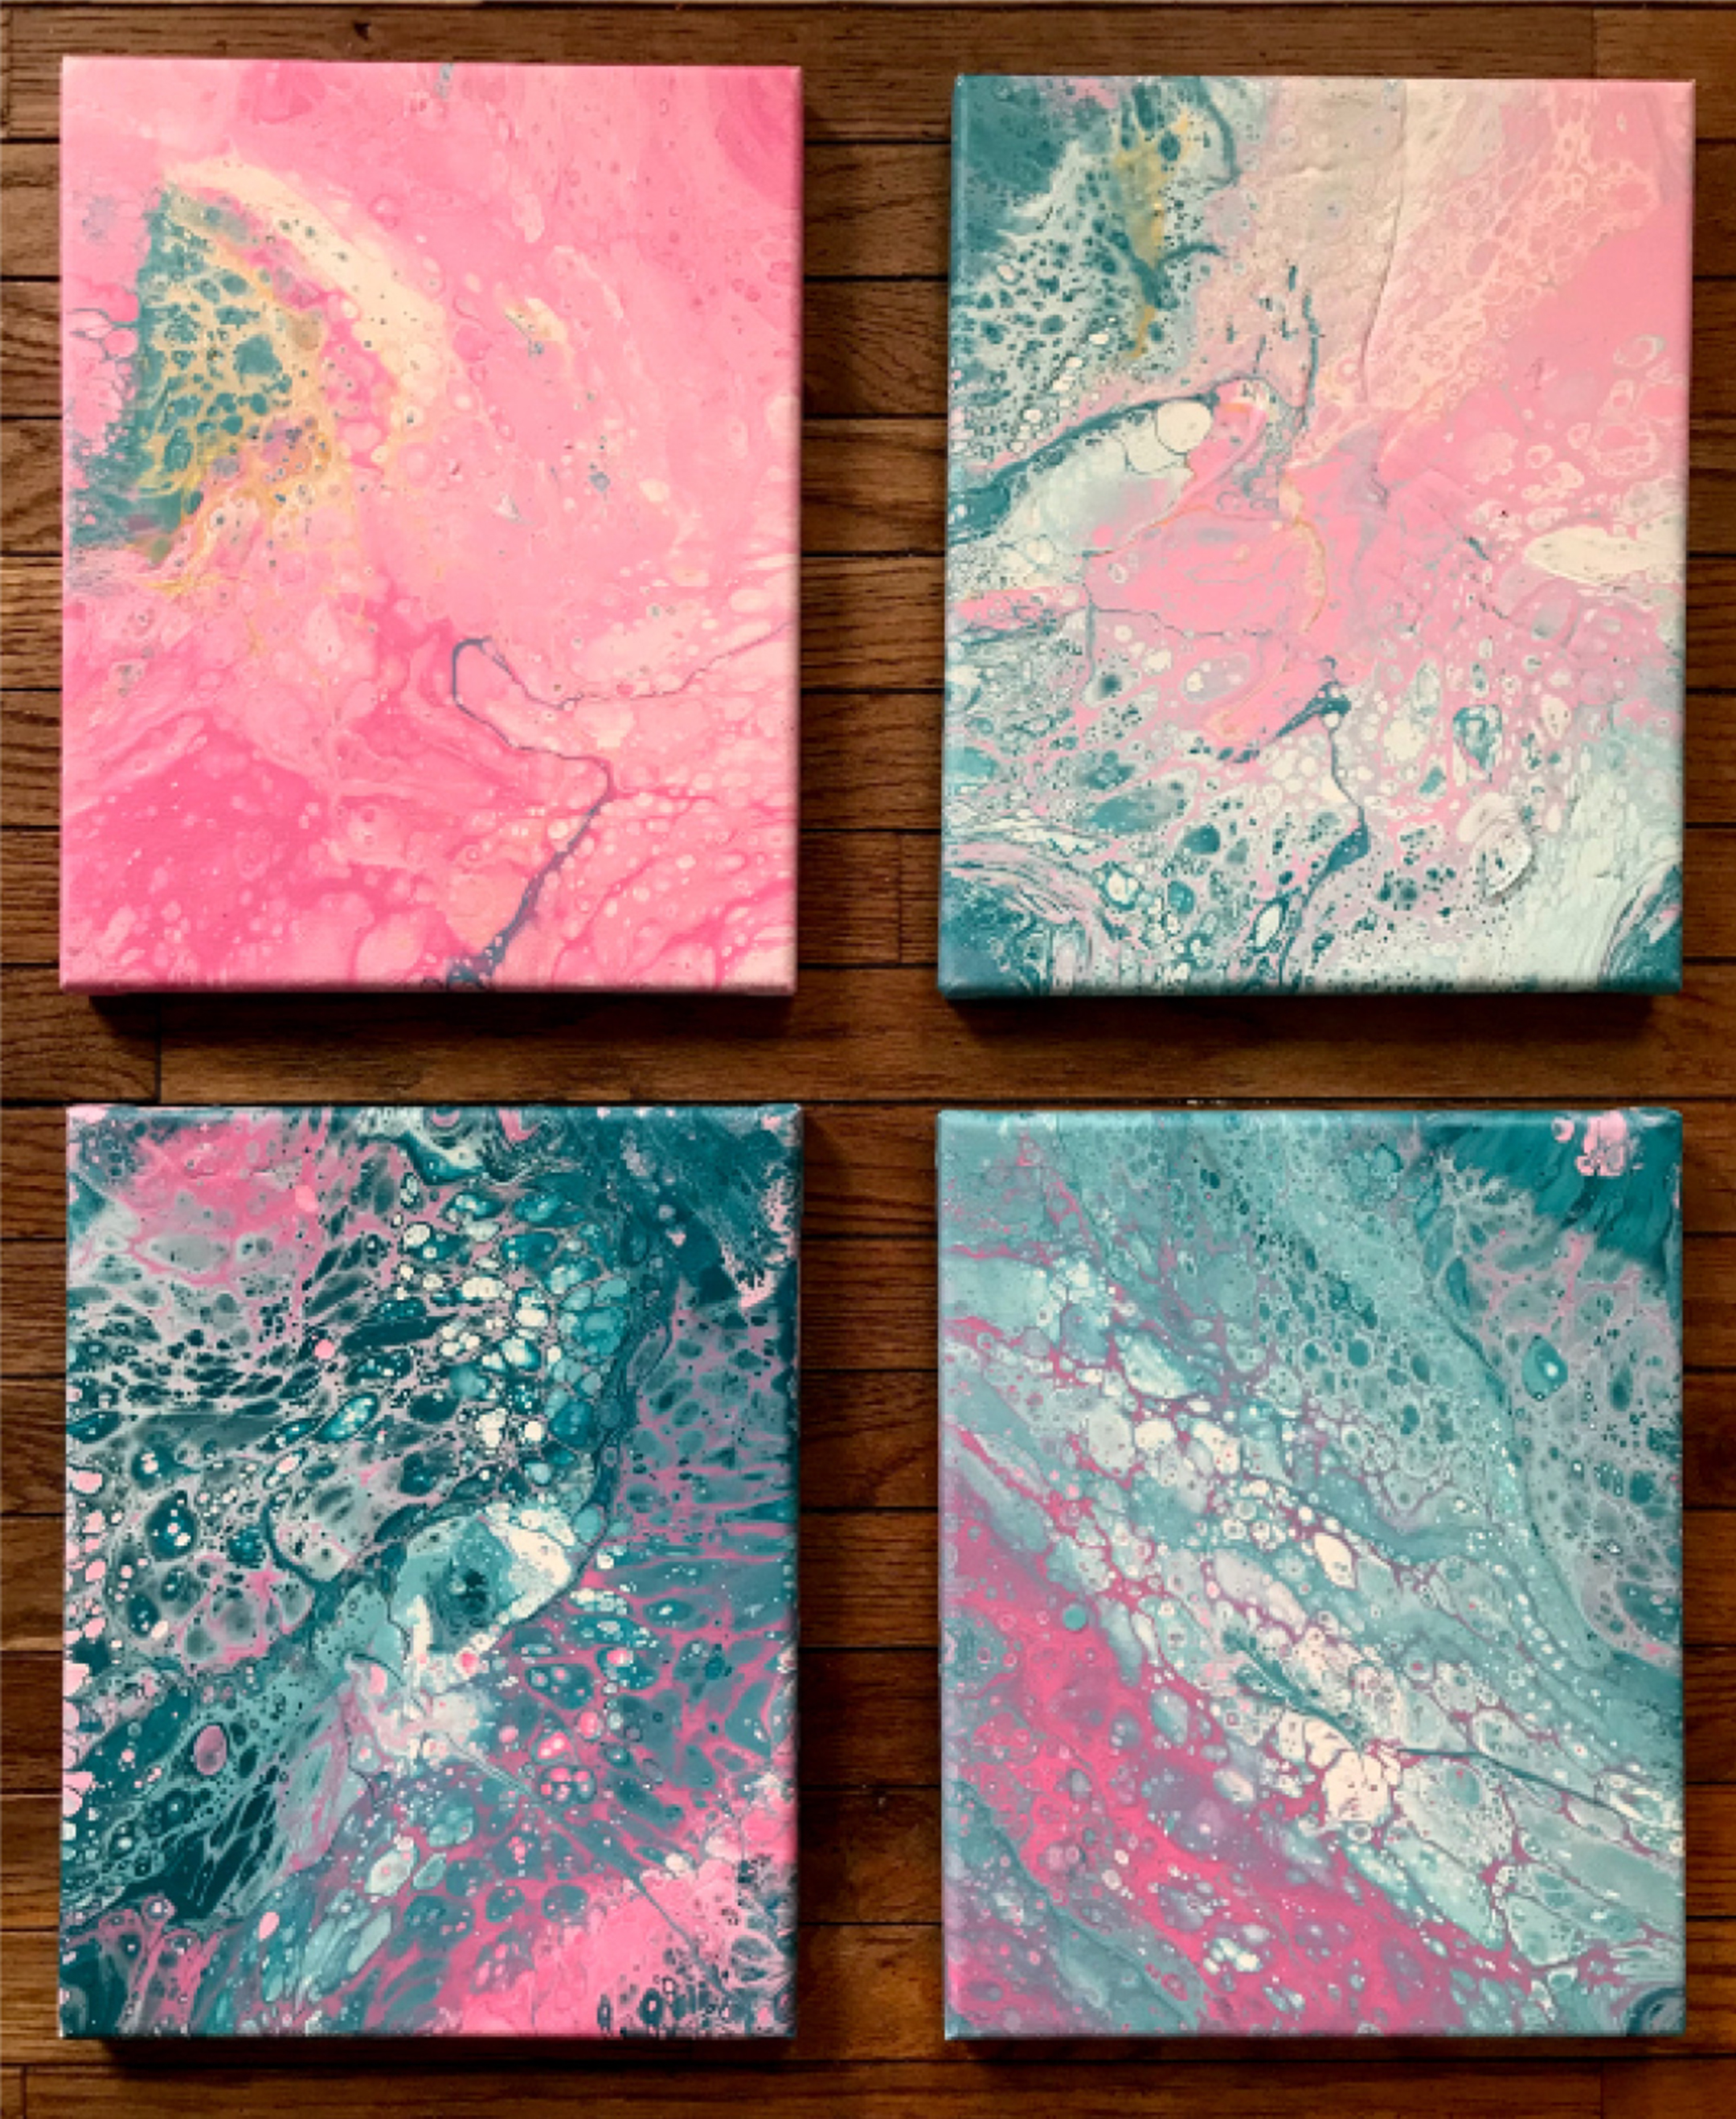 Four abstract paintings, two by two, in pink and turquoise